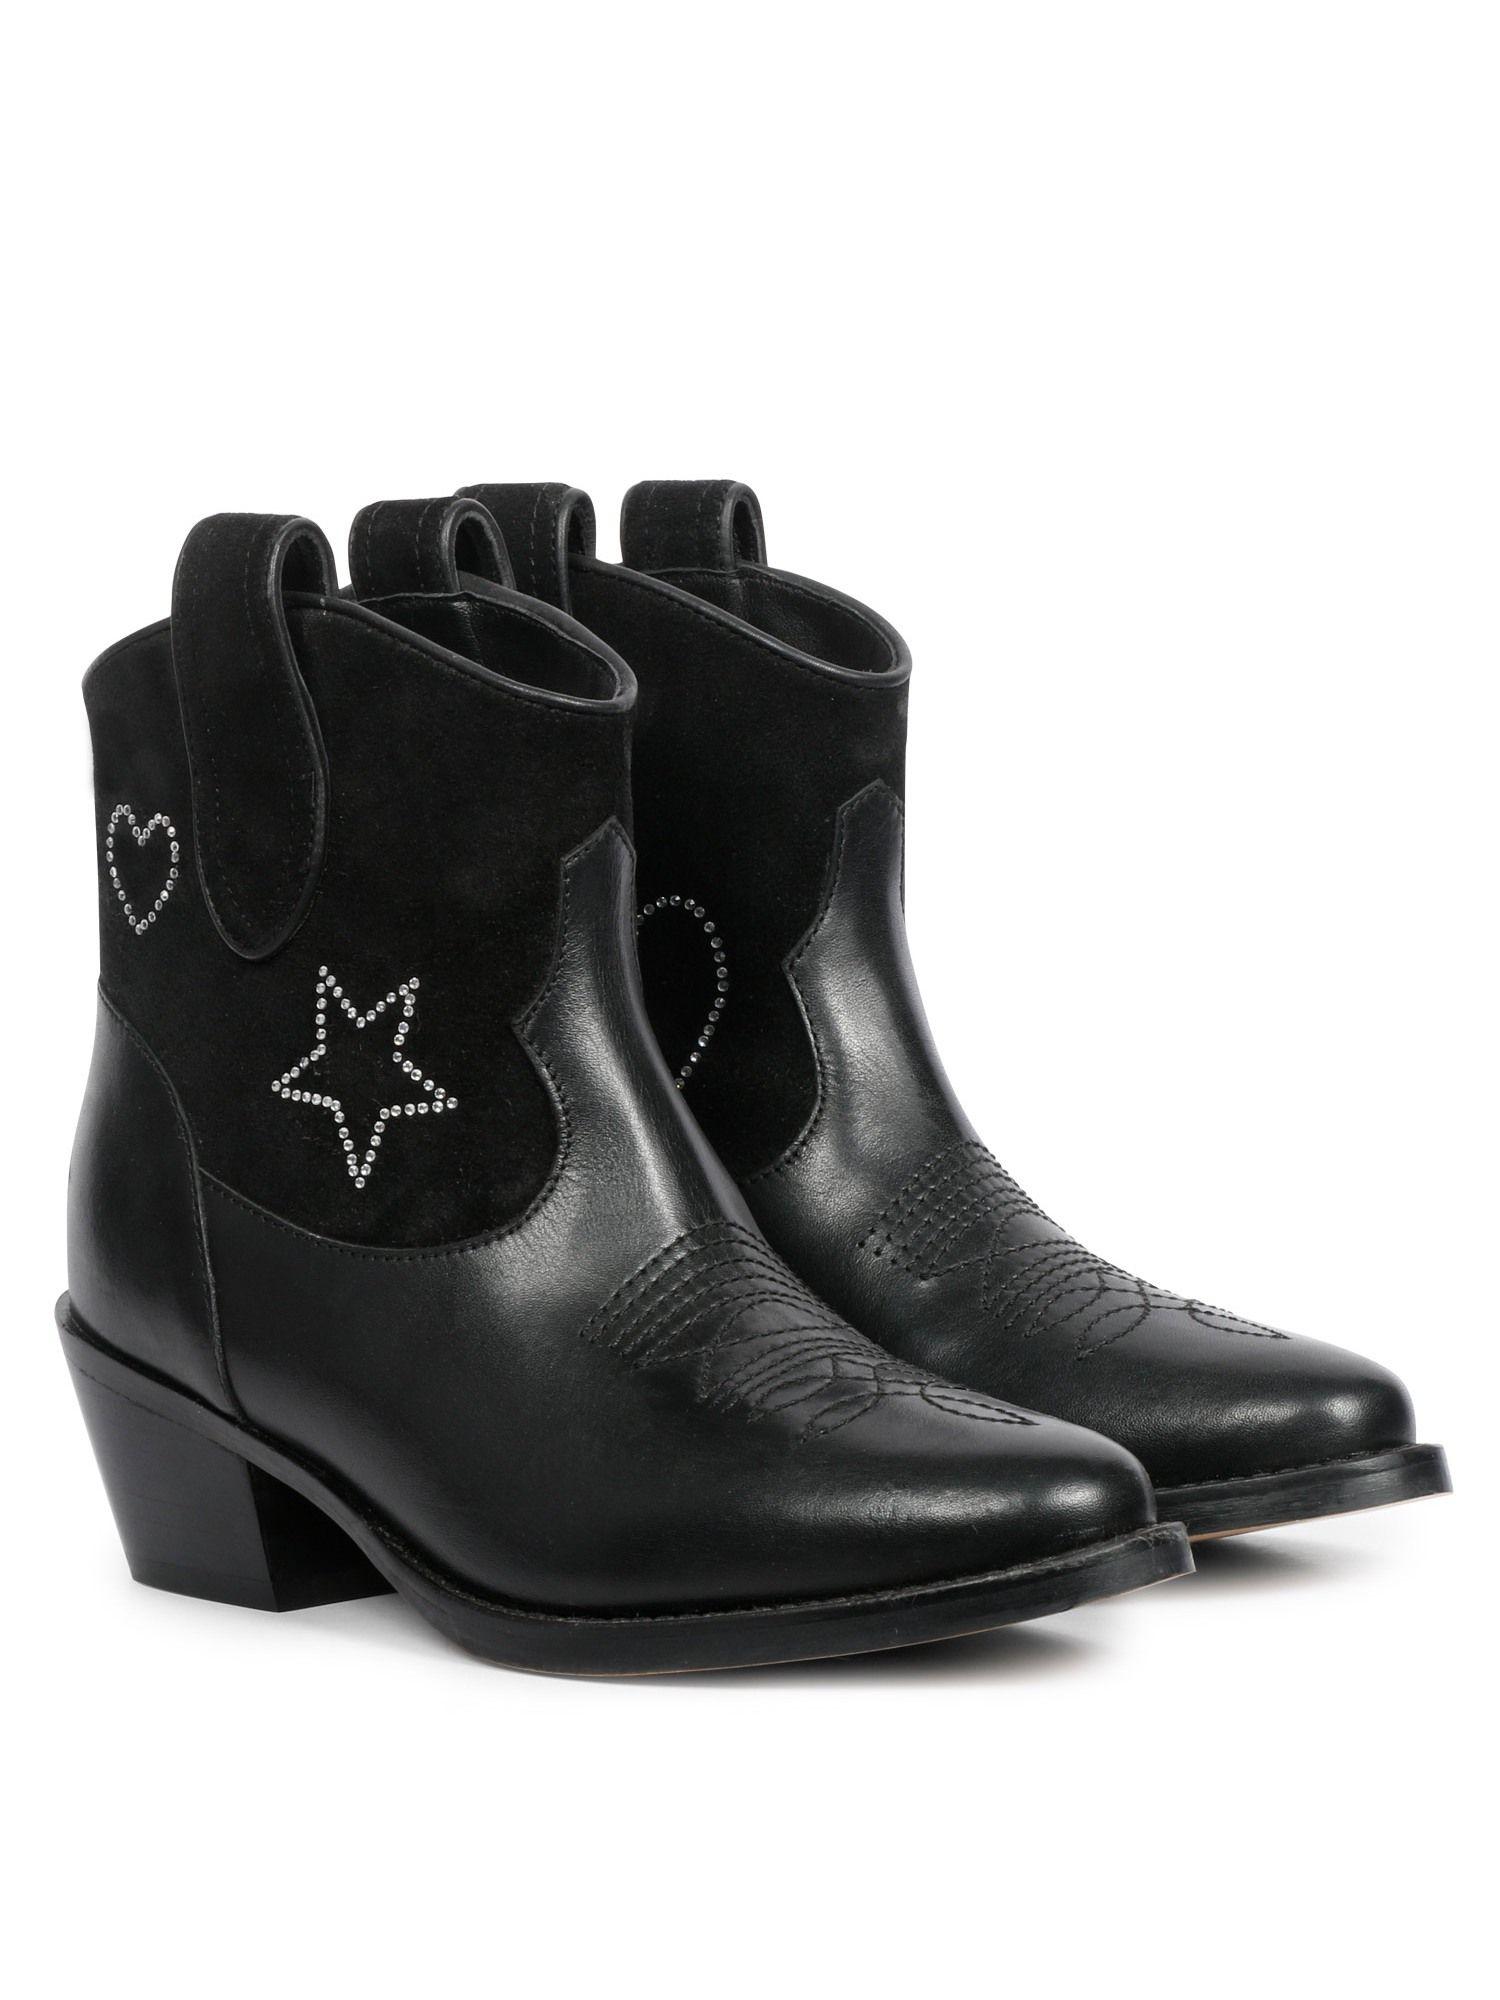 serenity silver star embellished black leather ankle boots